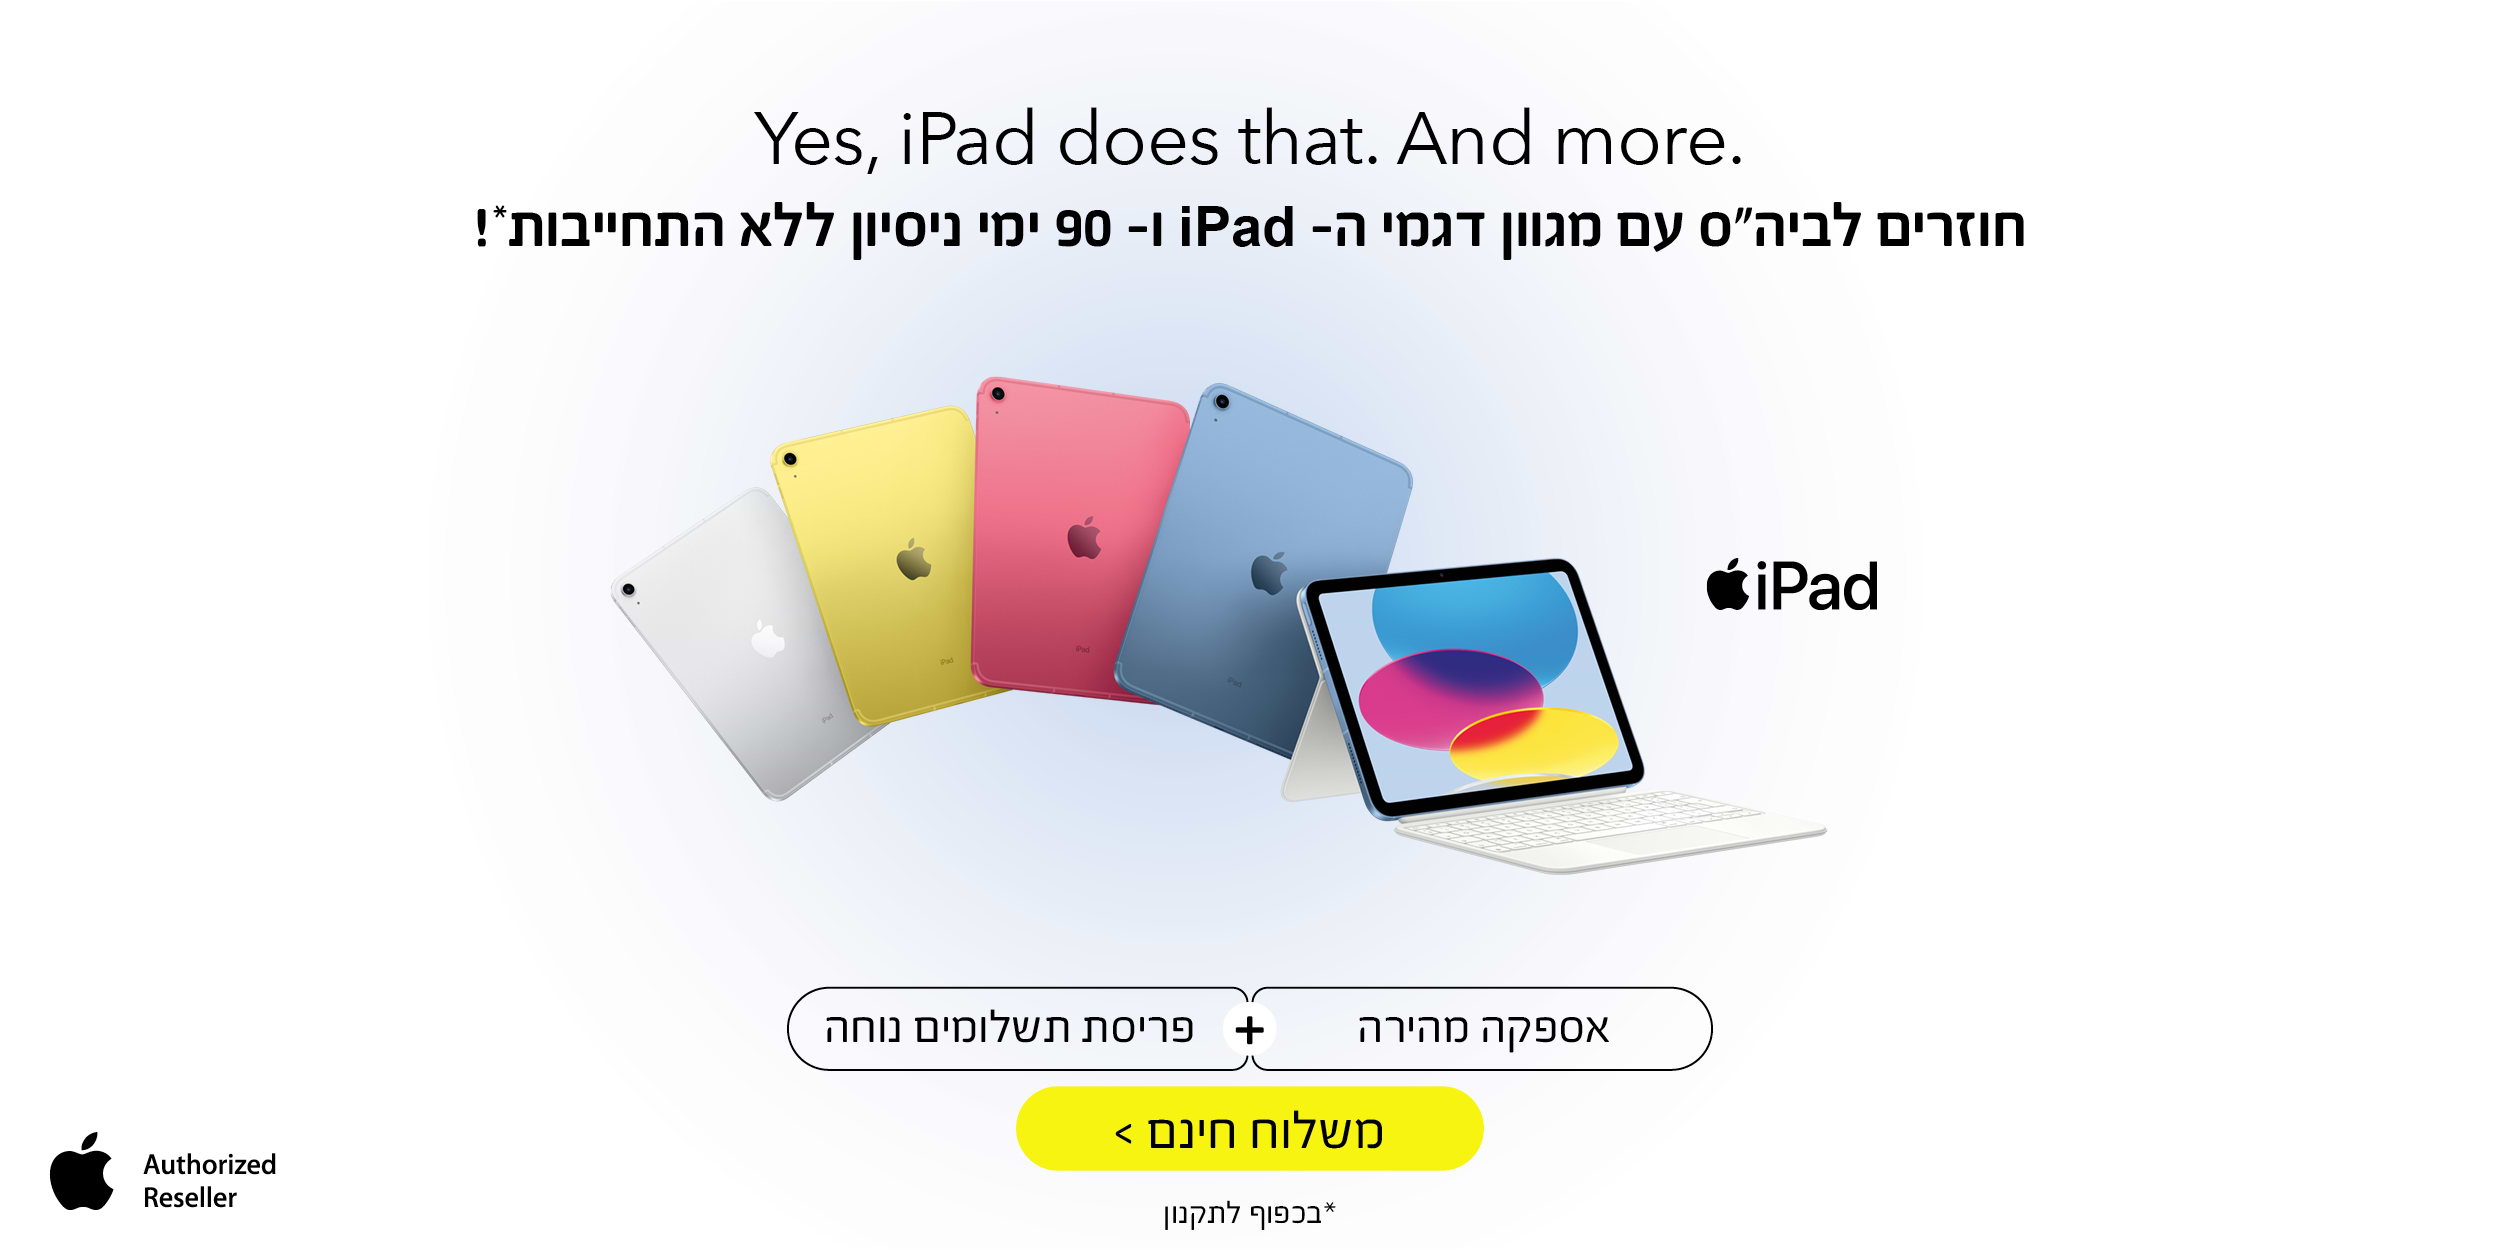 yes, iPad does that. And more. חוזרים לביה